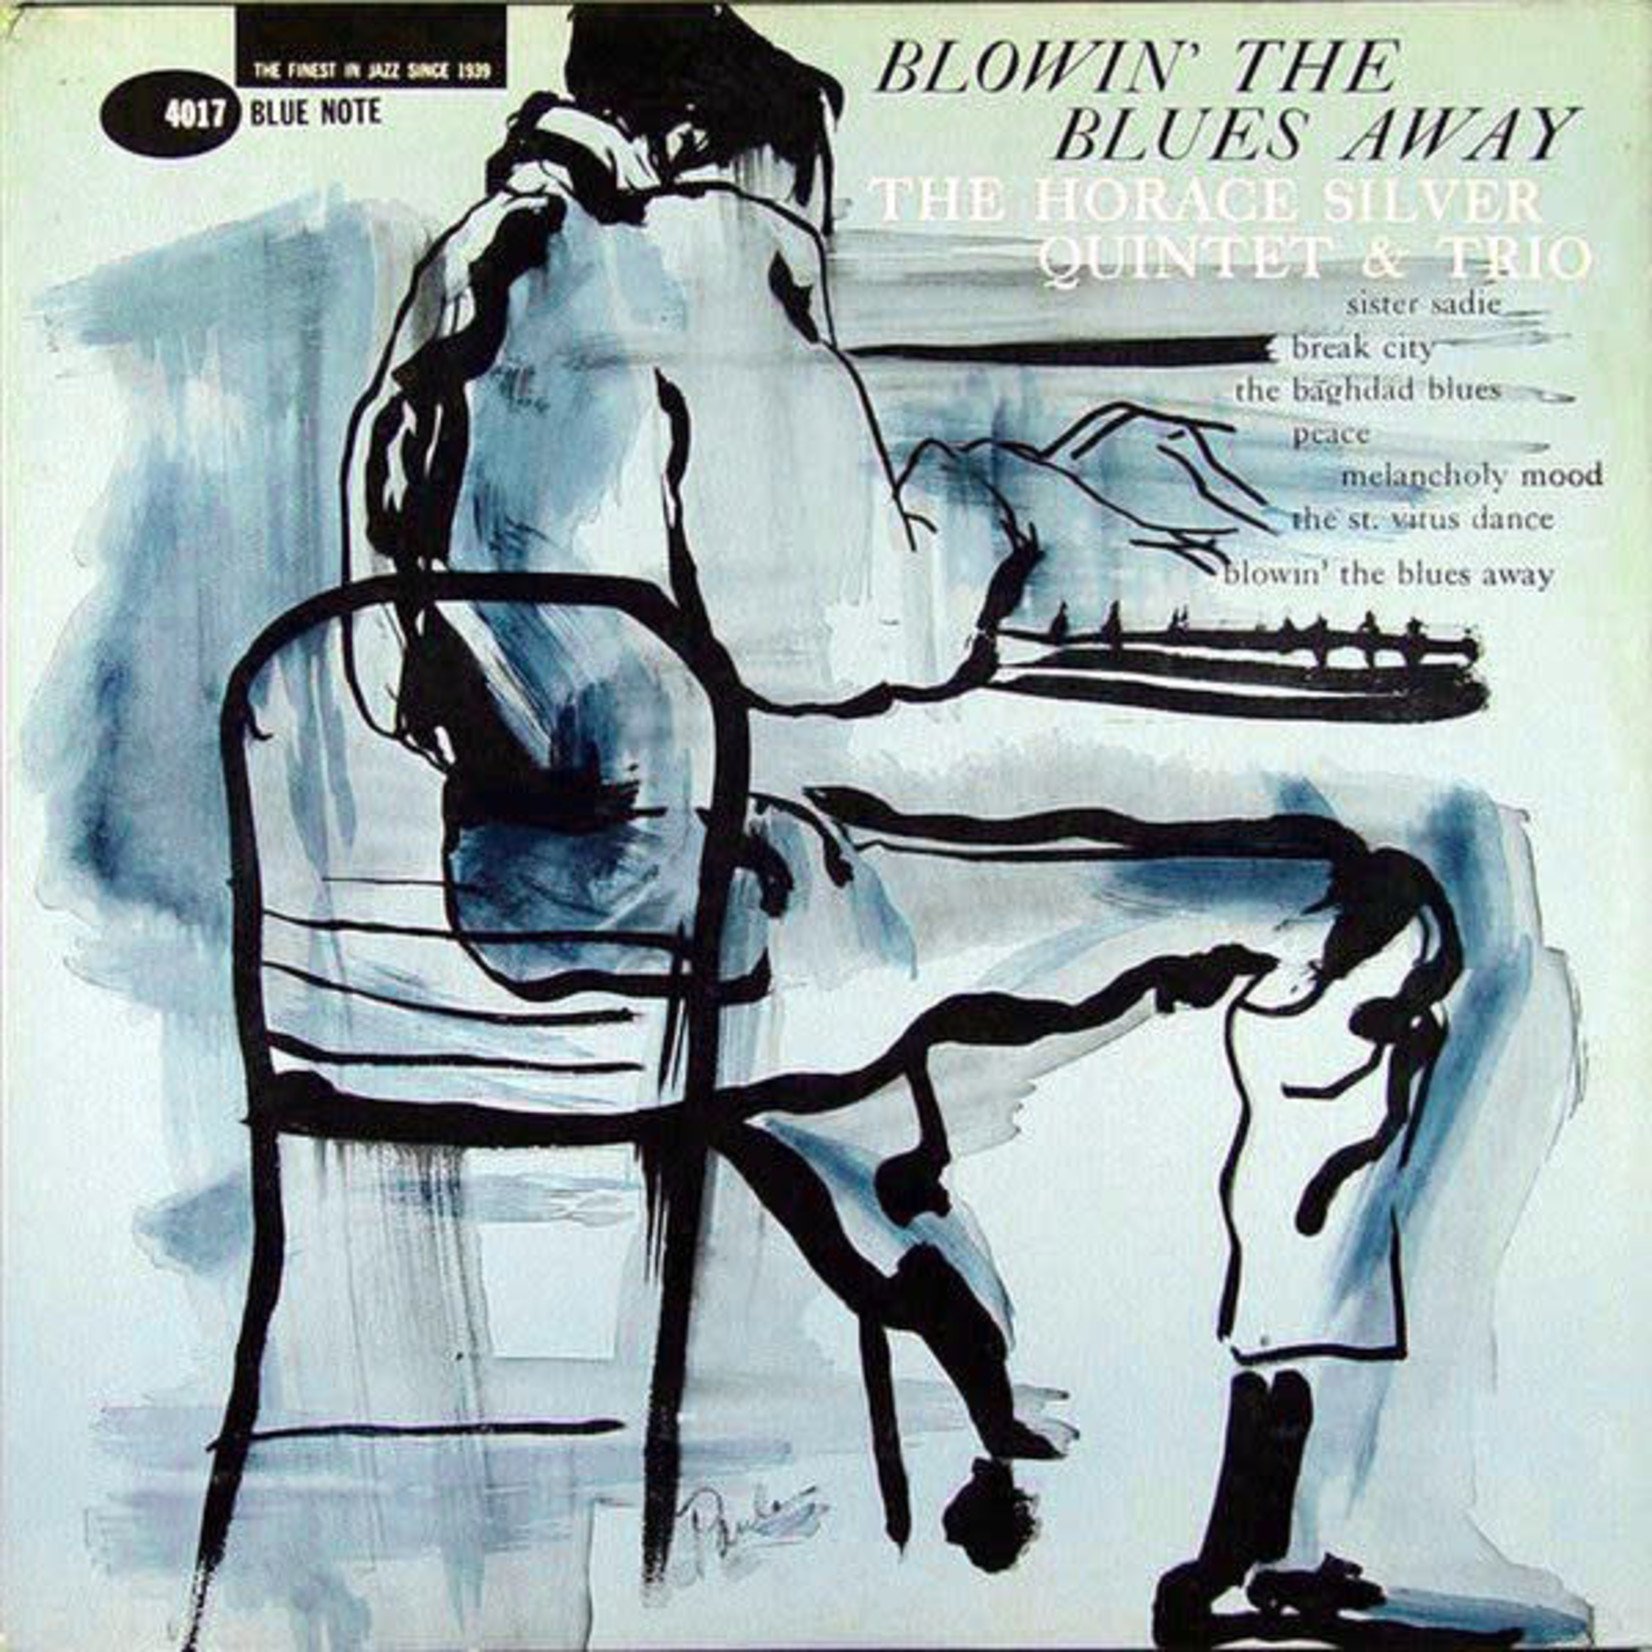 [New] Horace Silver - Blowin' the Blues Away